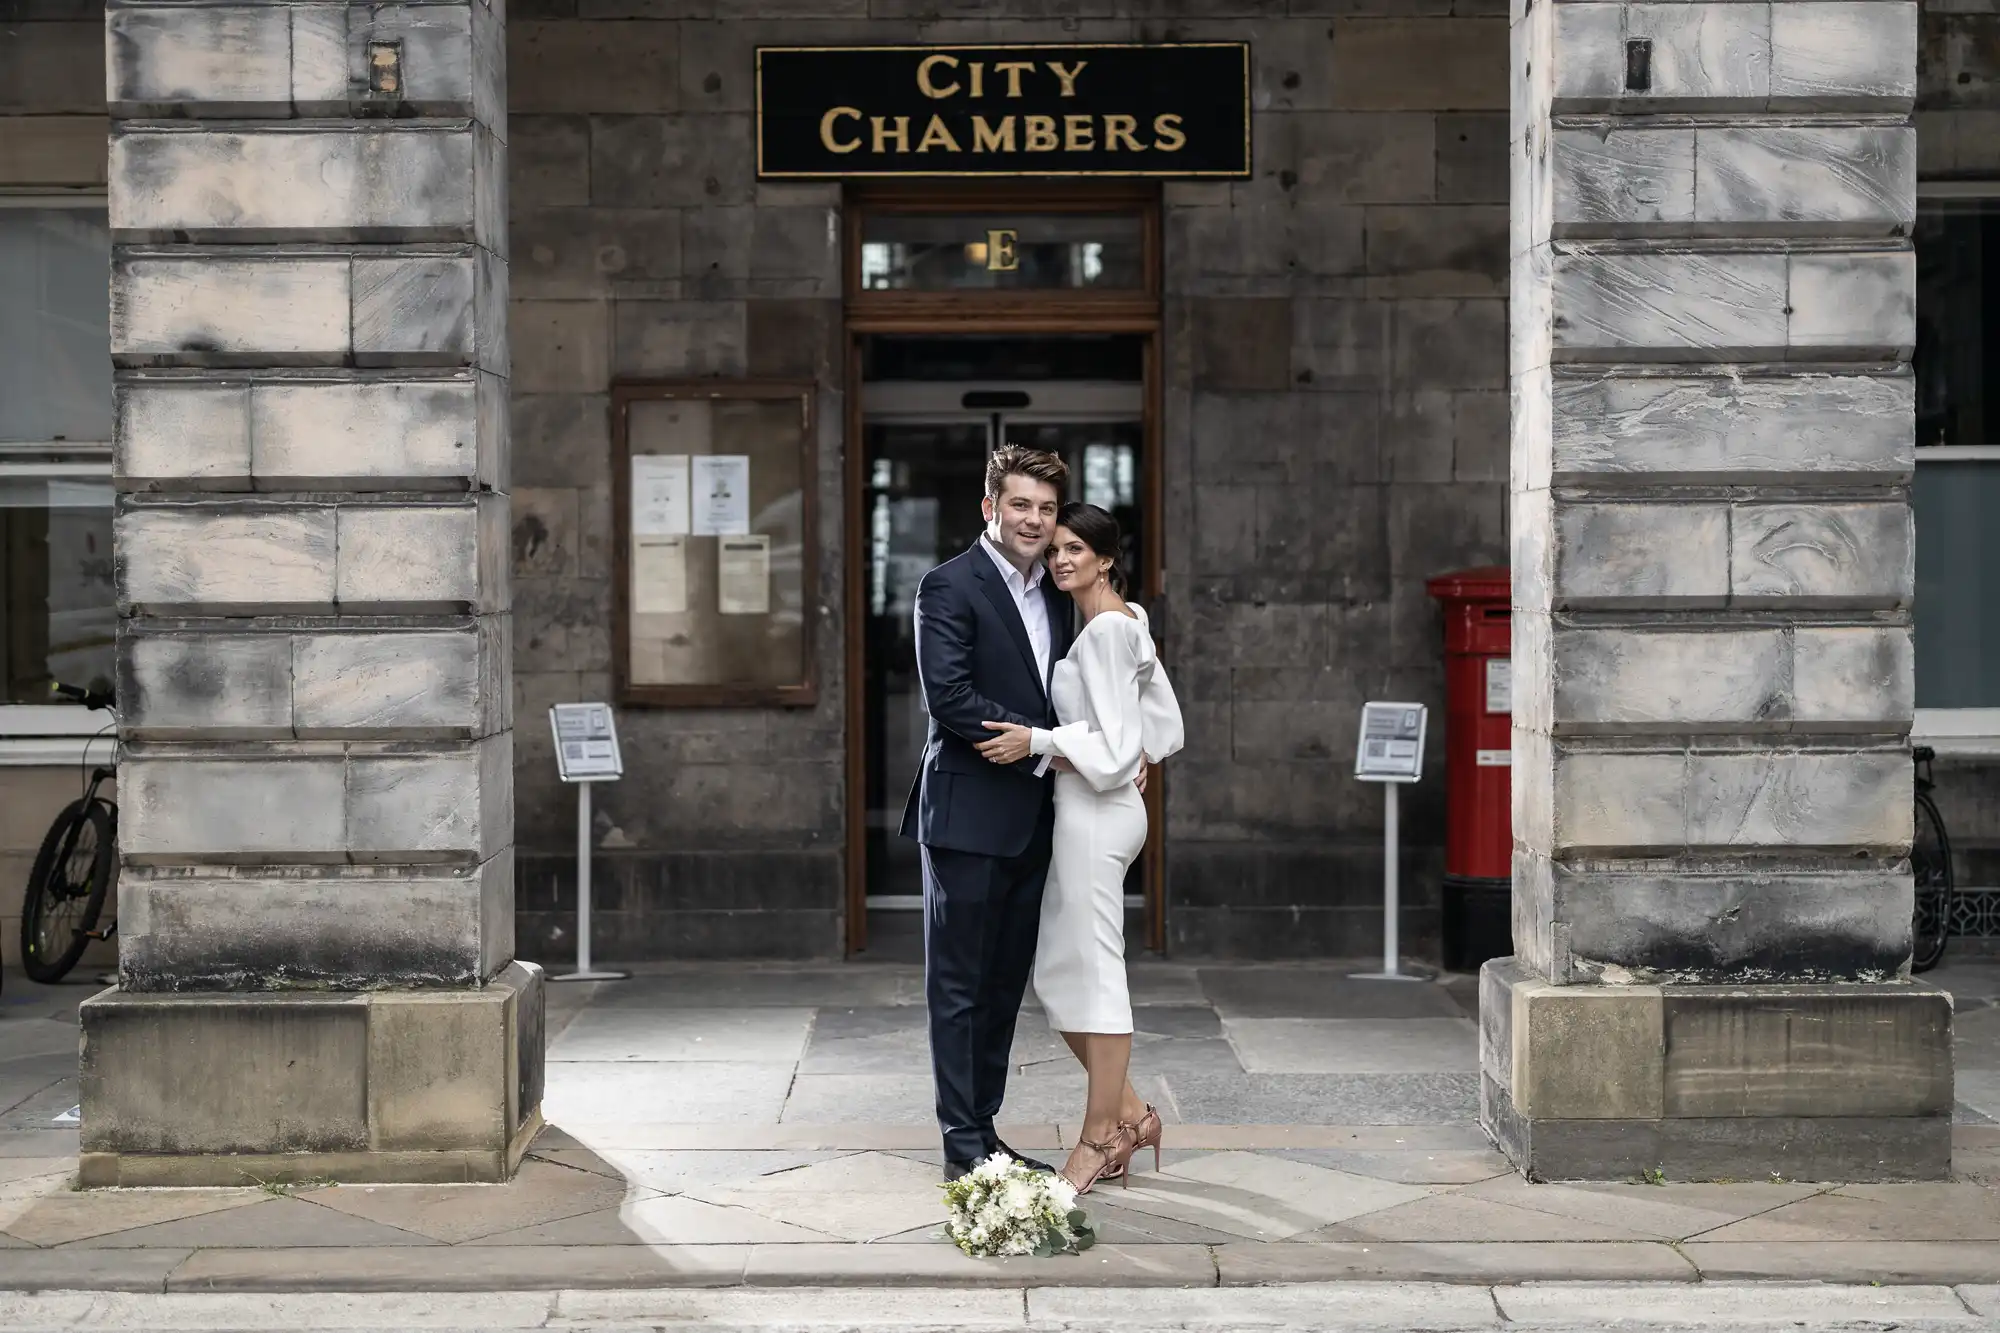 A couple embracing and smiling outside the city chambers, with the bride in a white suit and the groom in a dark suit, standing next to a bouquet on the ground.